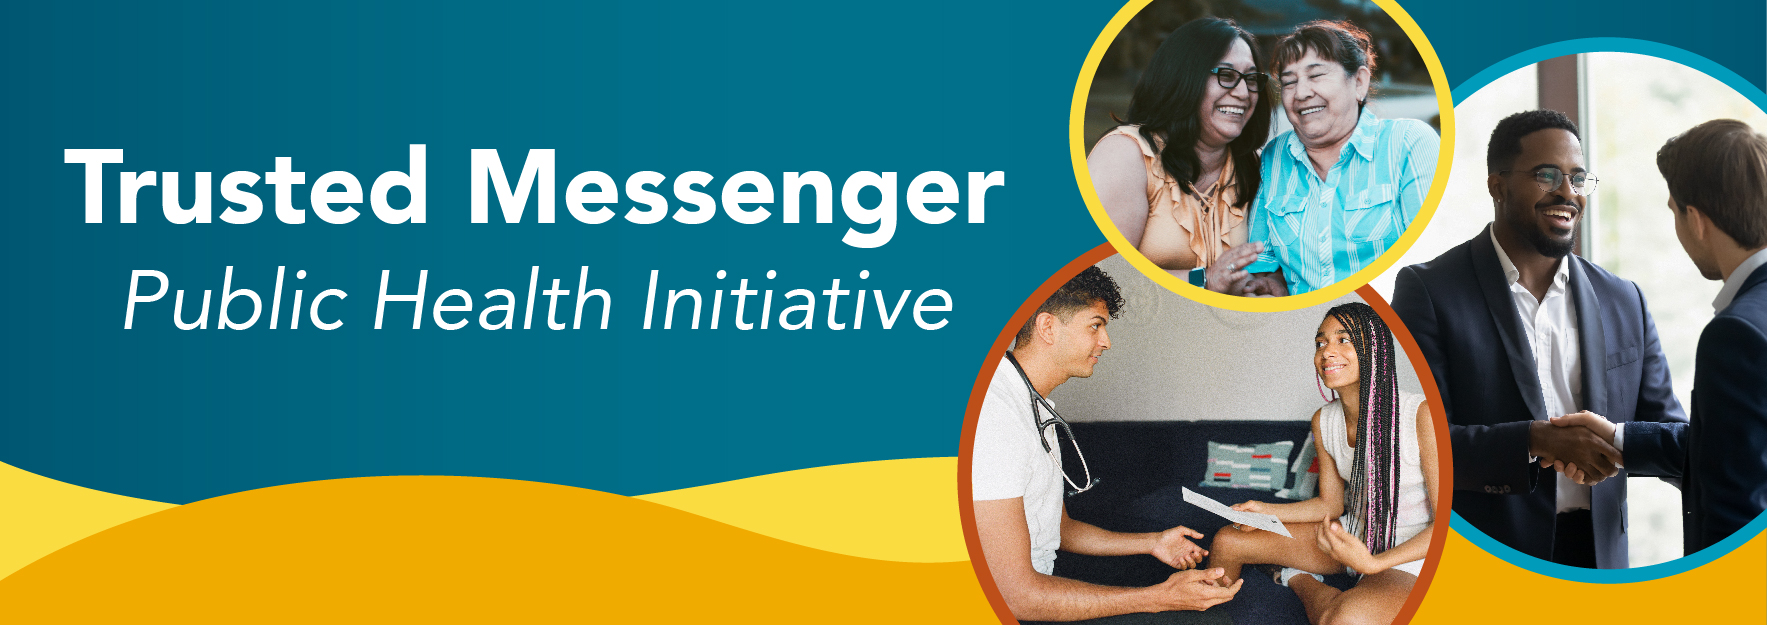 Trusted Messenger: Public Health Initiative webpage banner with photos of people shaking hands and talking in a medical setting on a blue and yellow background